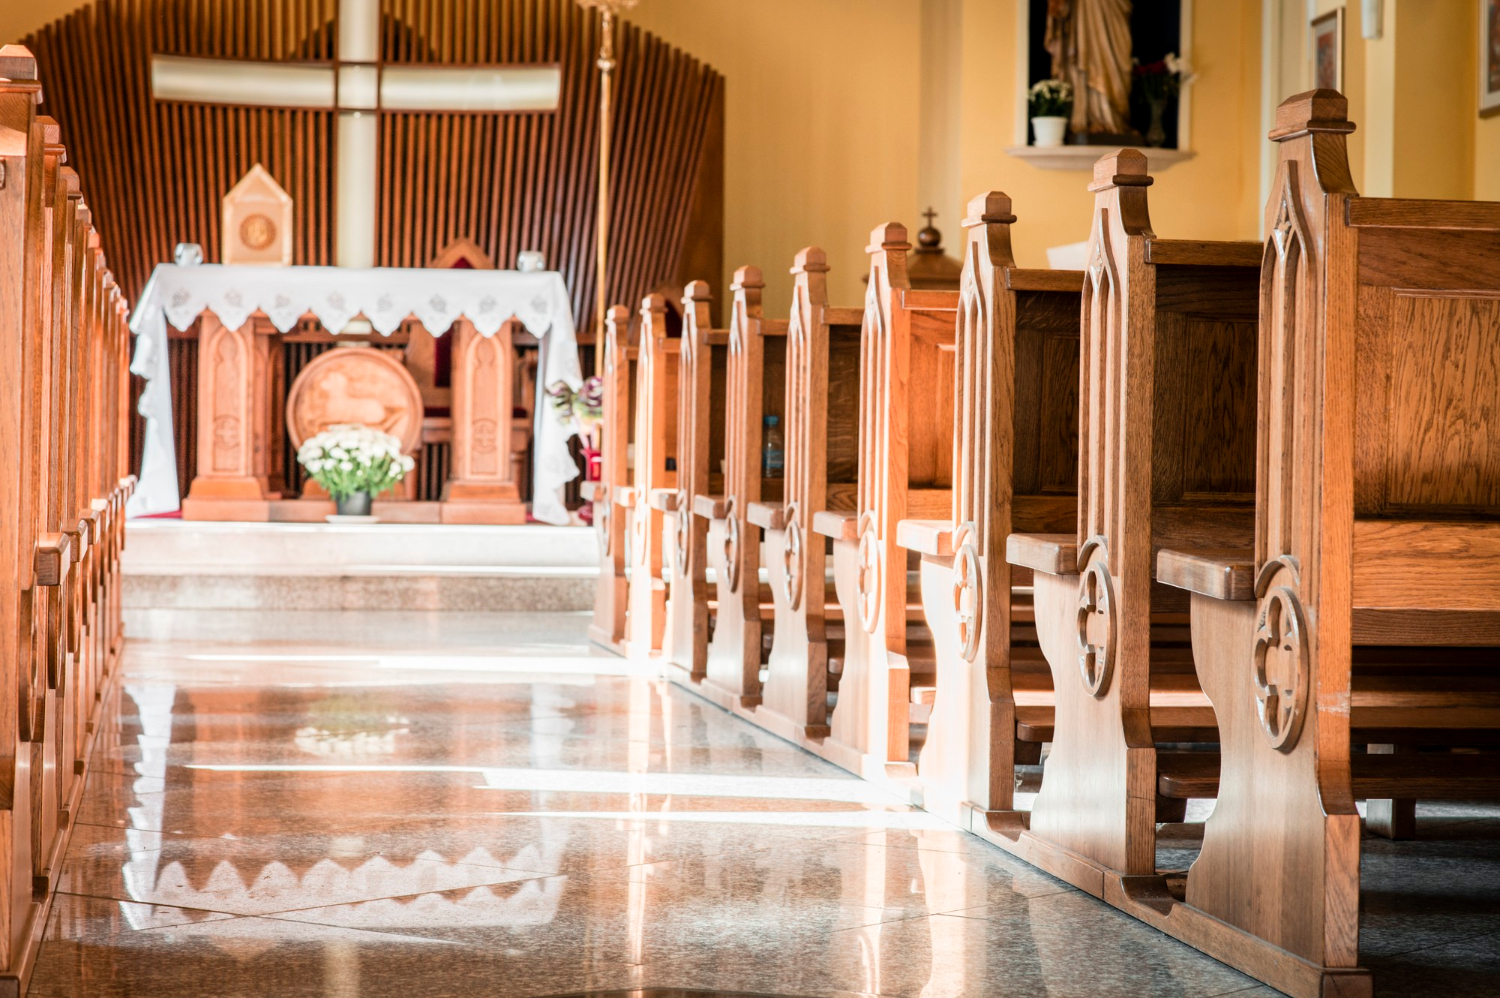 You are currently viewing Minneapolis Church Cleaning Service: How to Hire the Best Cleaning Team